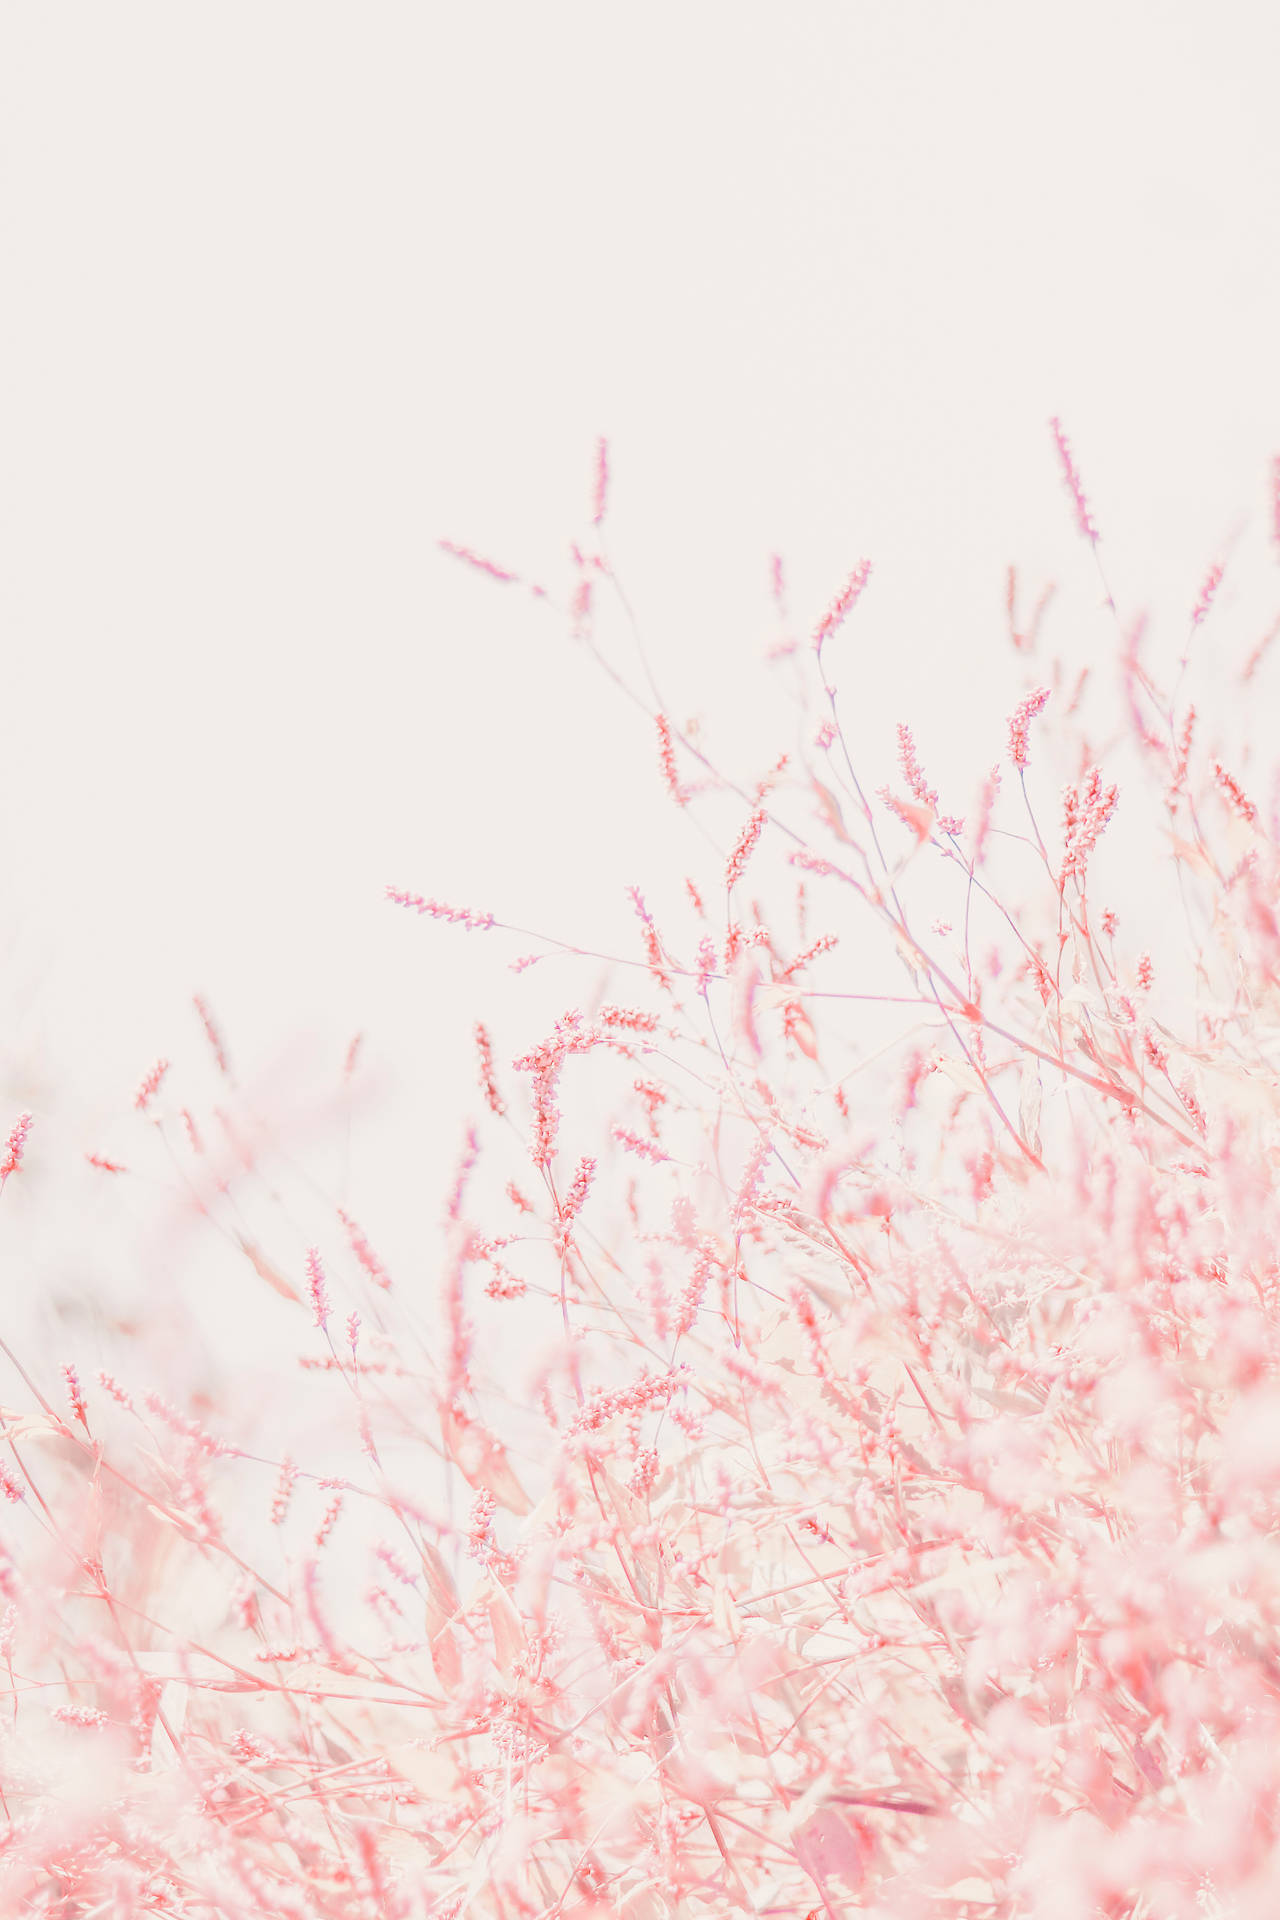 Pastel Pink 3138X4707 Wallpaper and Background Image